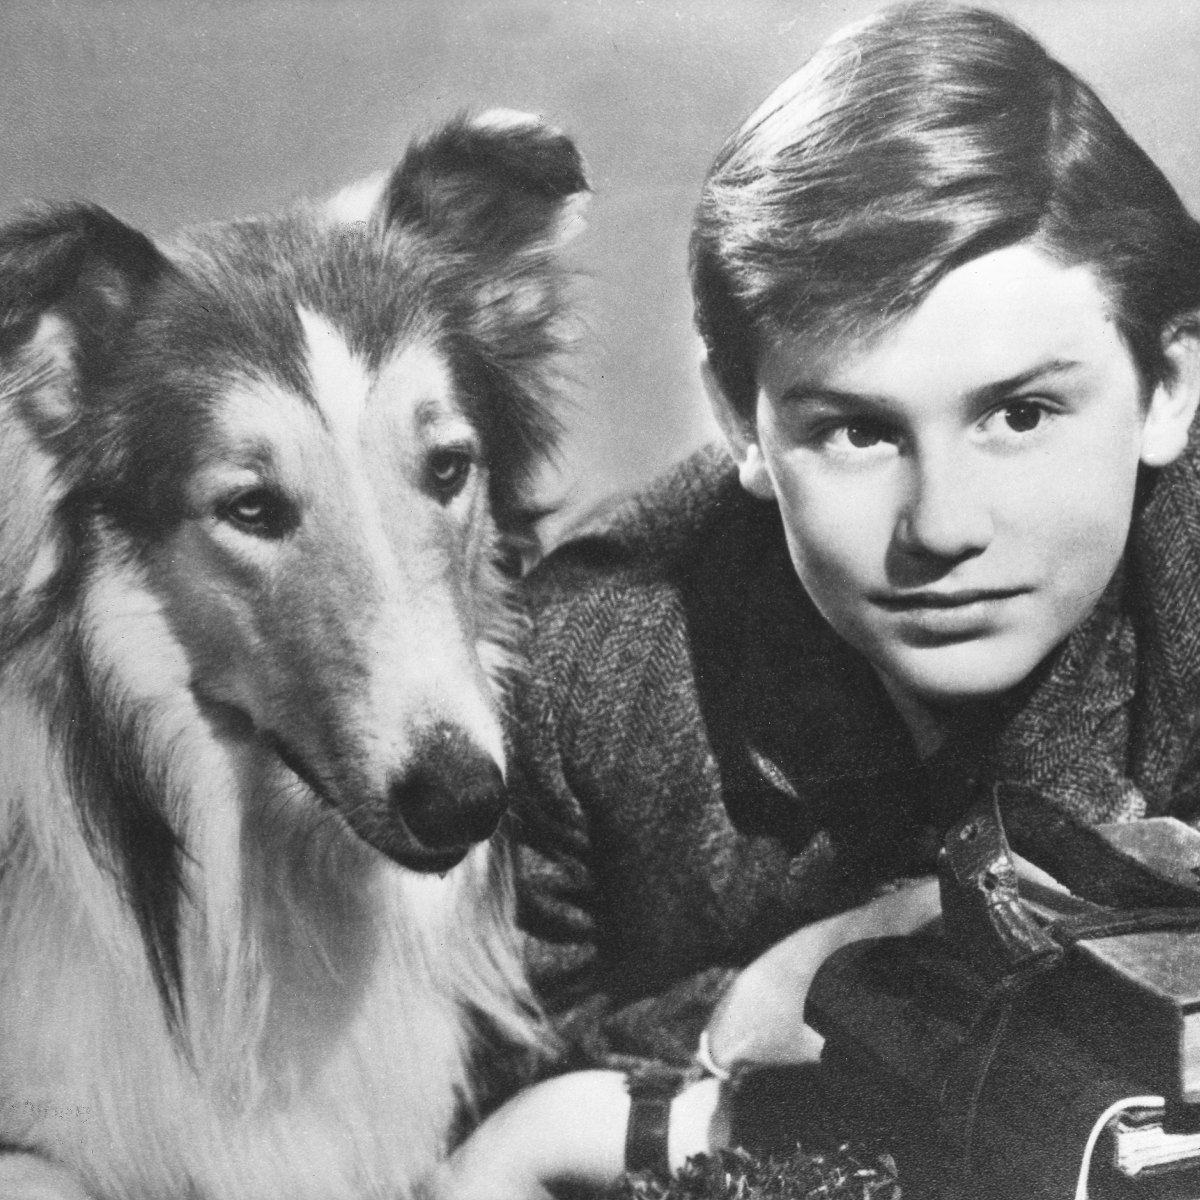 What Happened To Lassie?